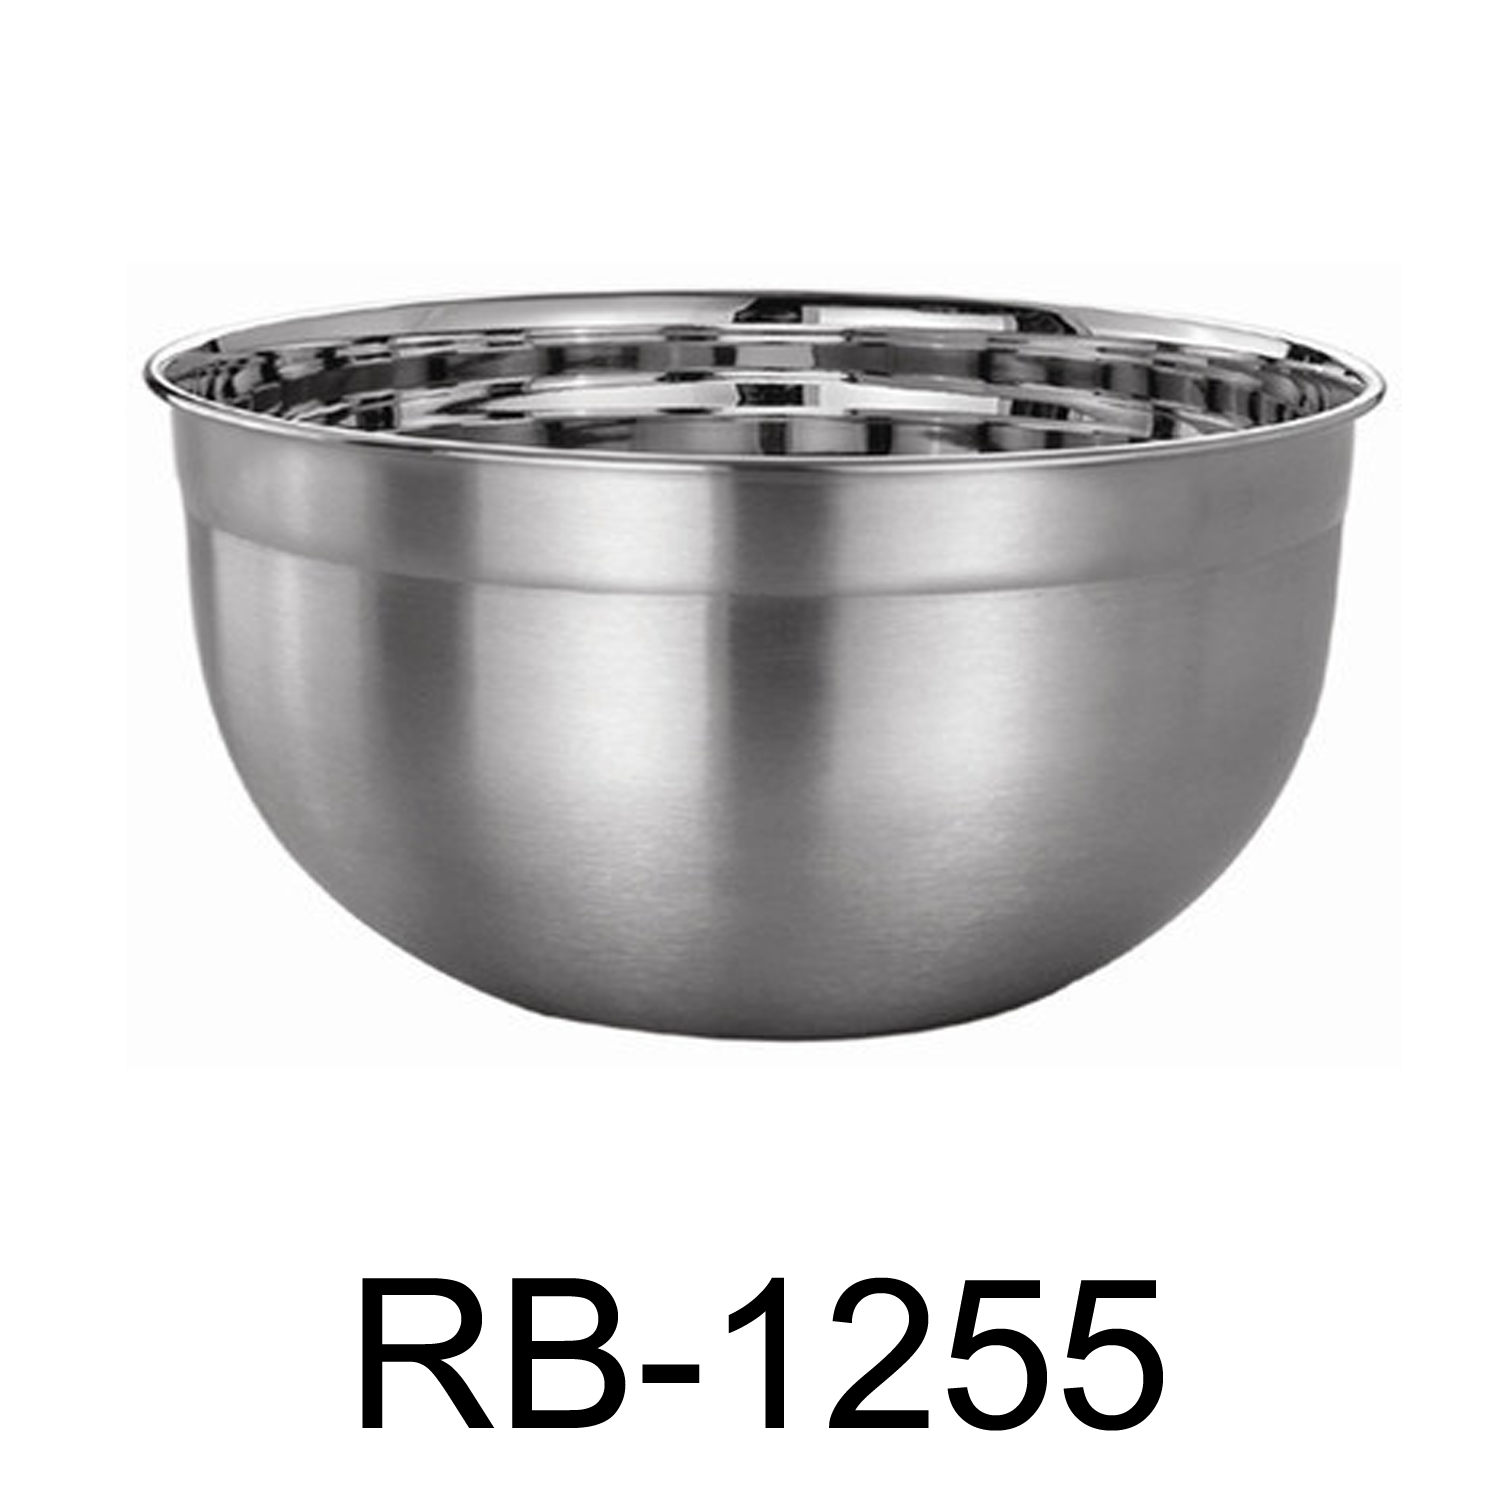 8 QT Deep German mixing Bowl Stainless Steel Dish Washer Safe – R